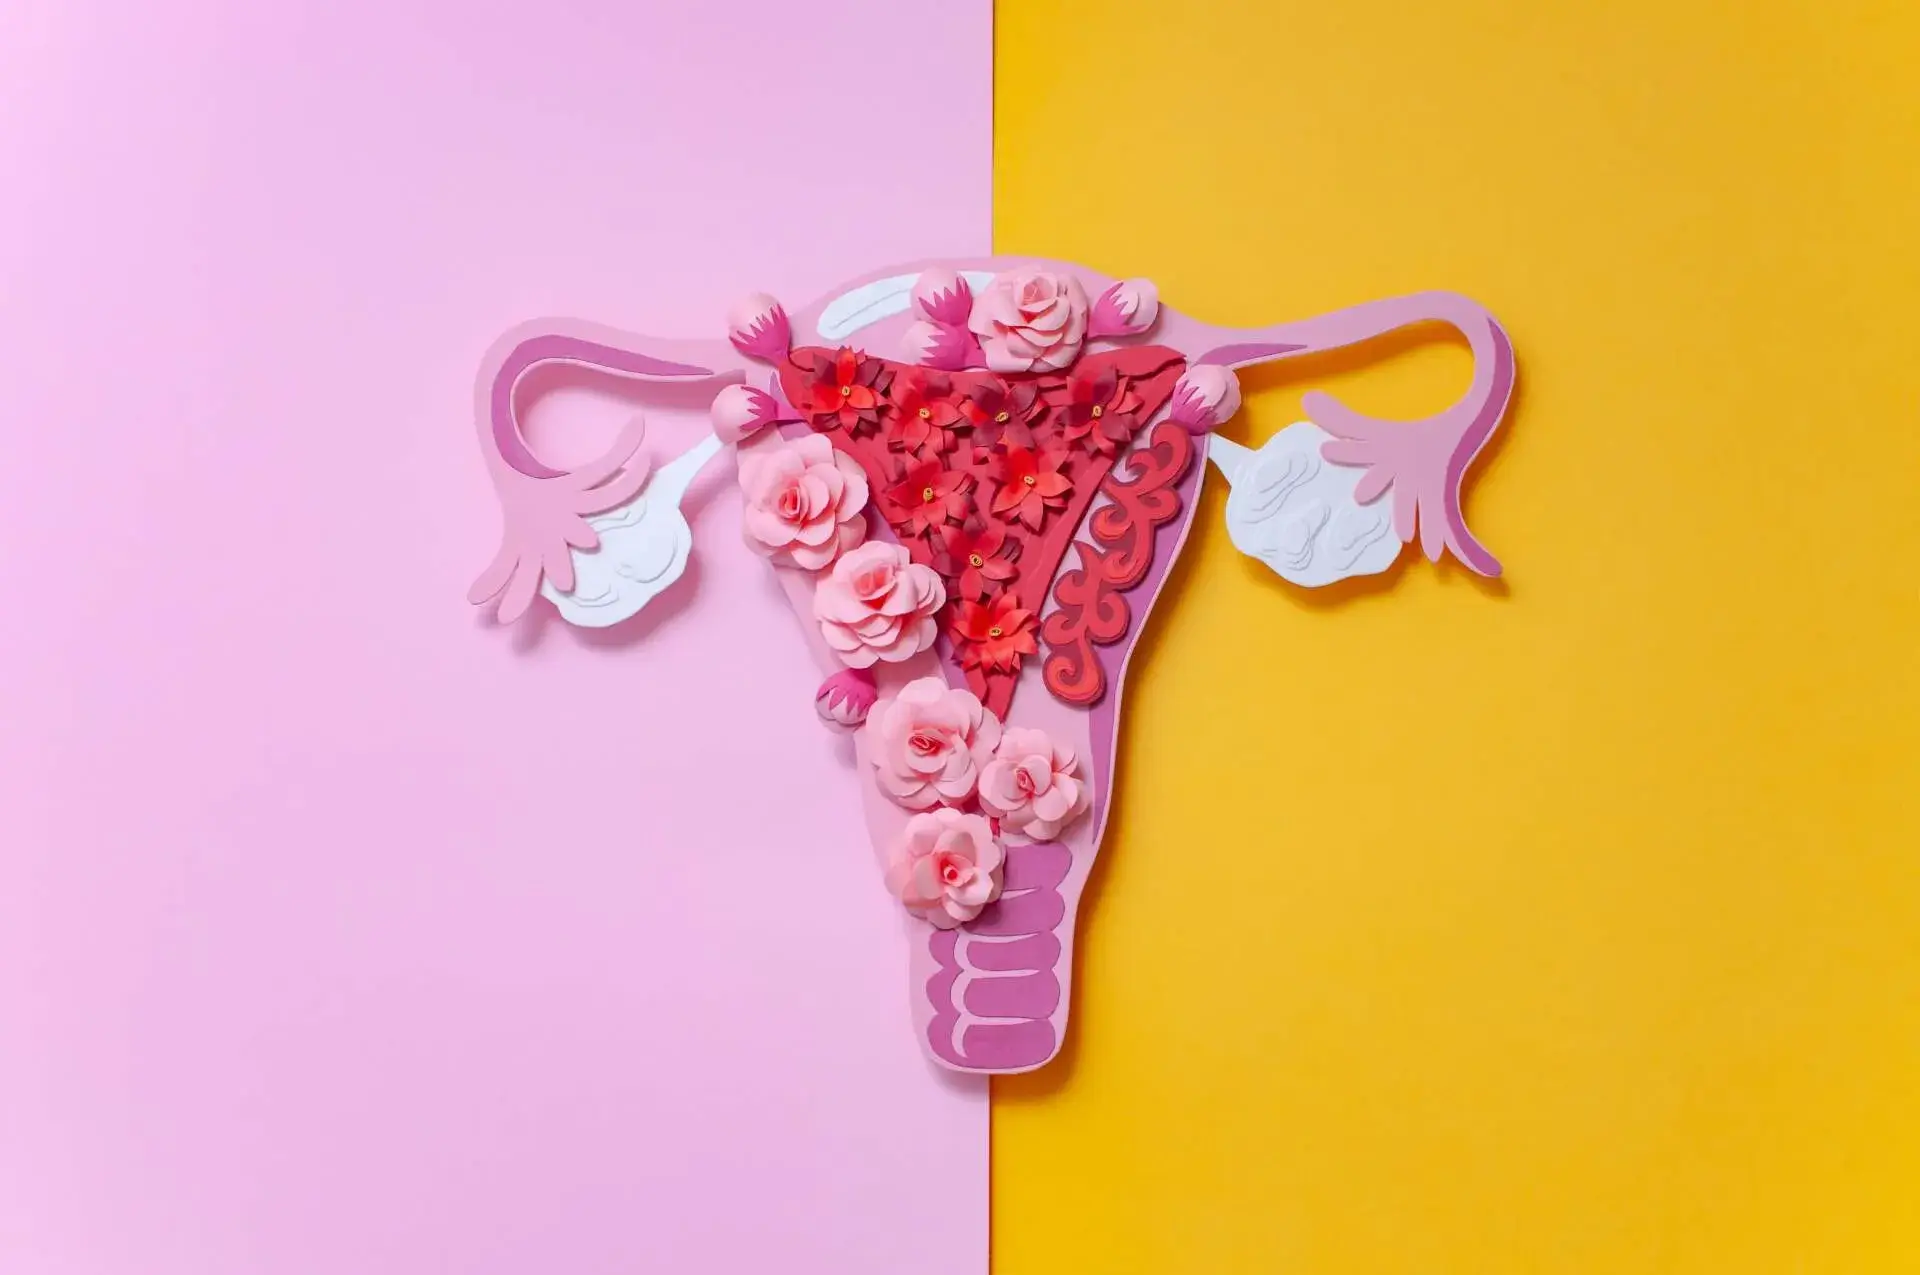 Endometriosis: Treatment Options and Things to Consider